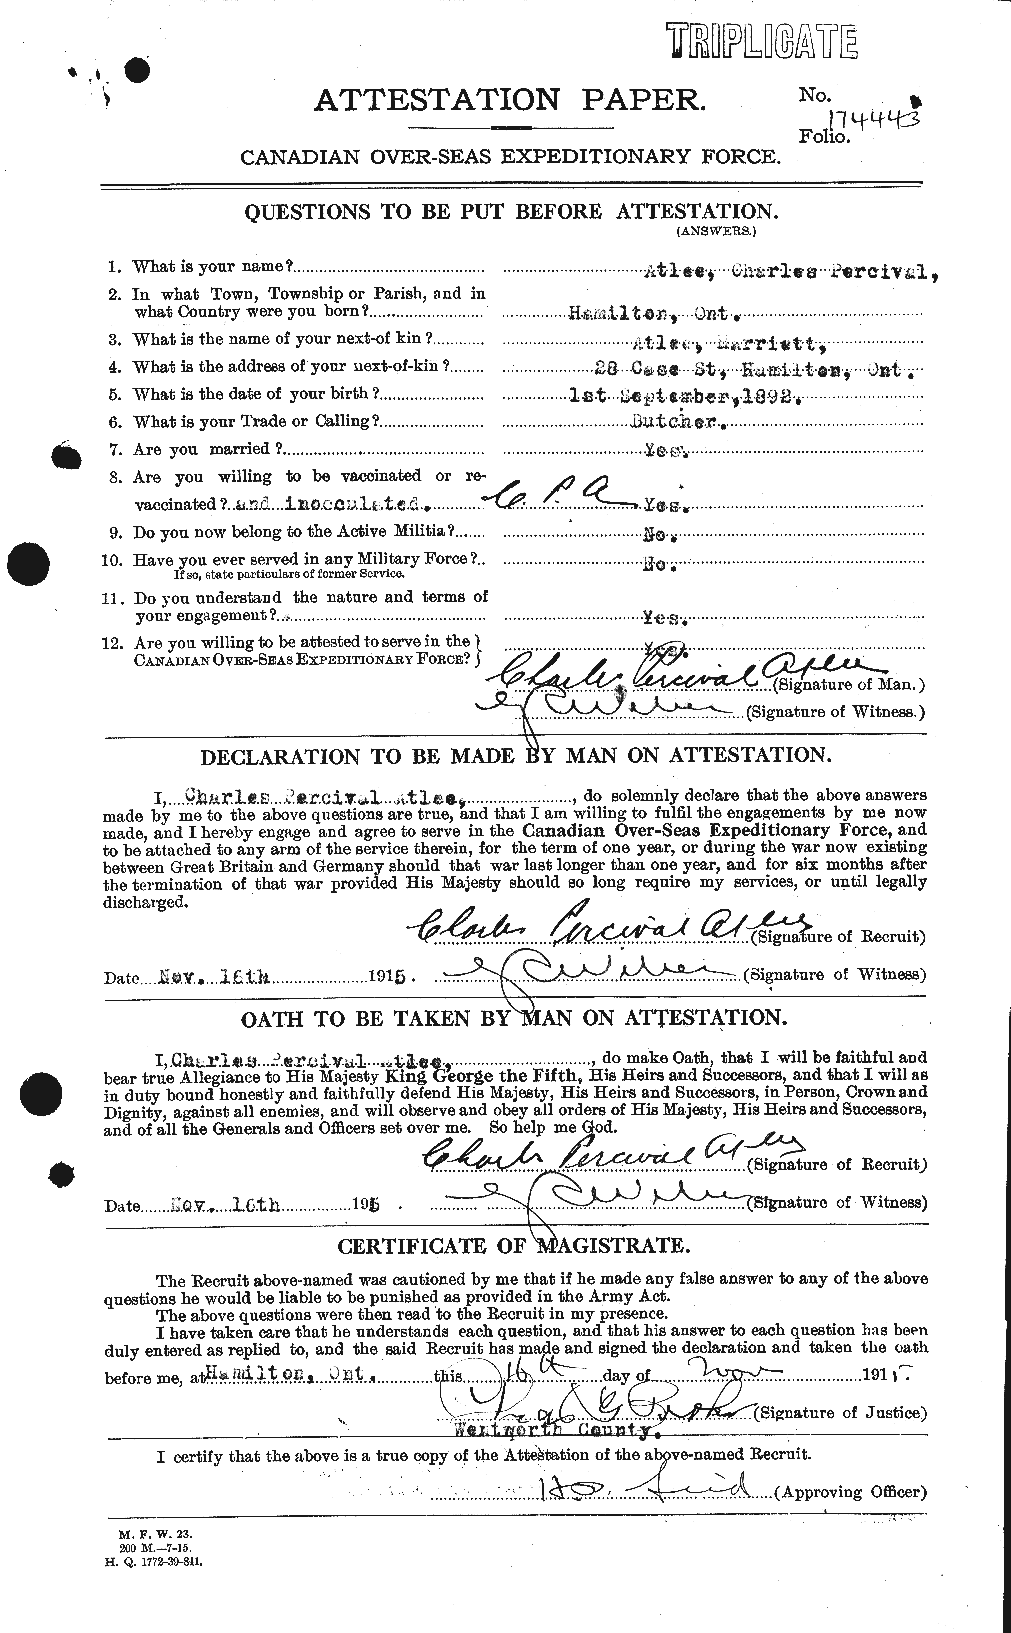 Personnel Records of the First World War - CEF 224157a